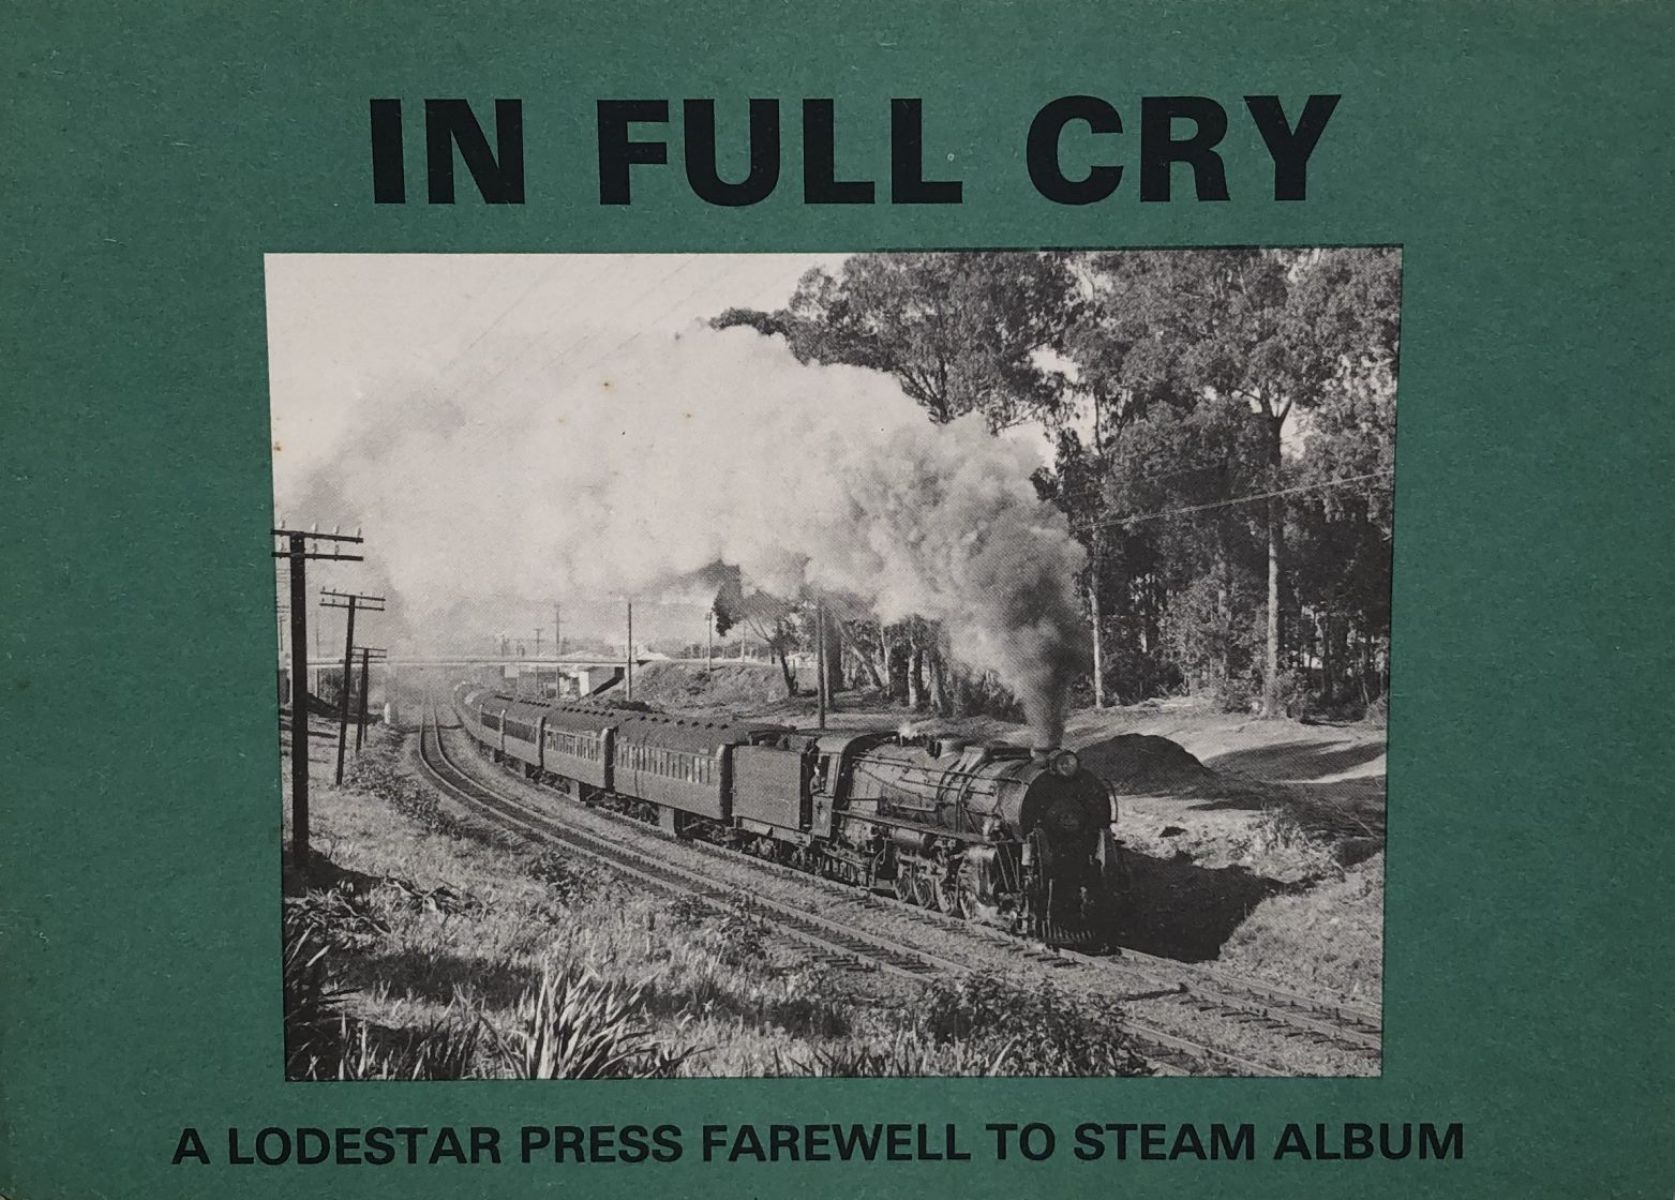 IN FULL CRY Farewell to Steam - pictorial album